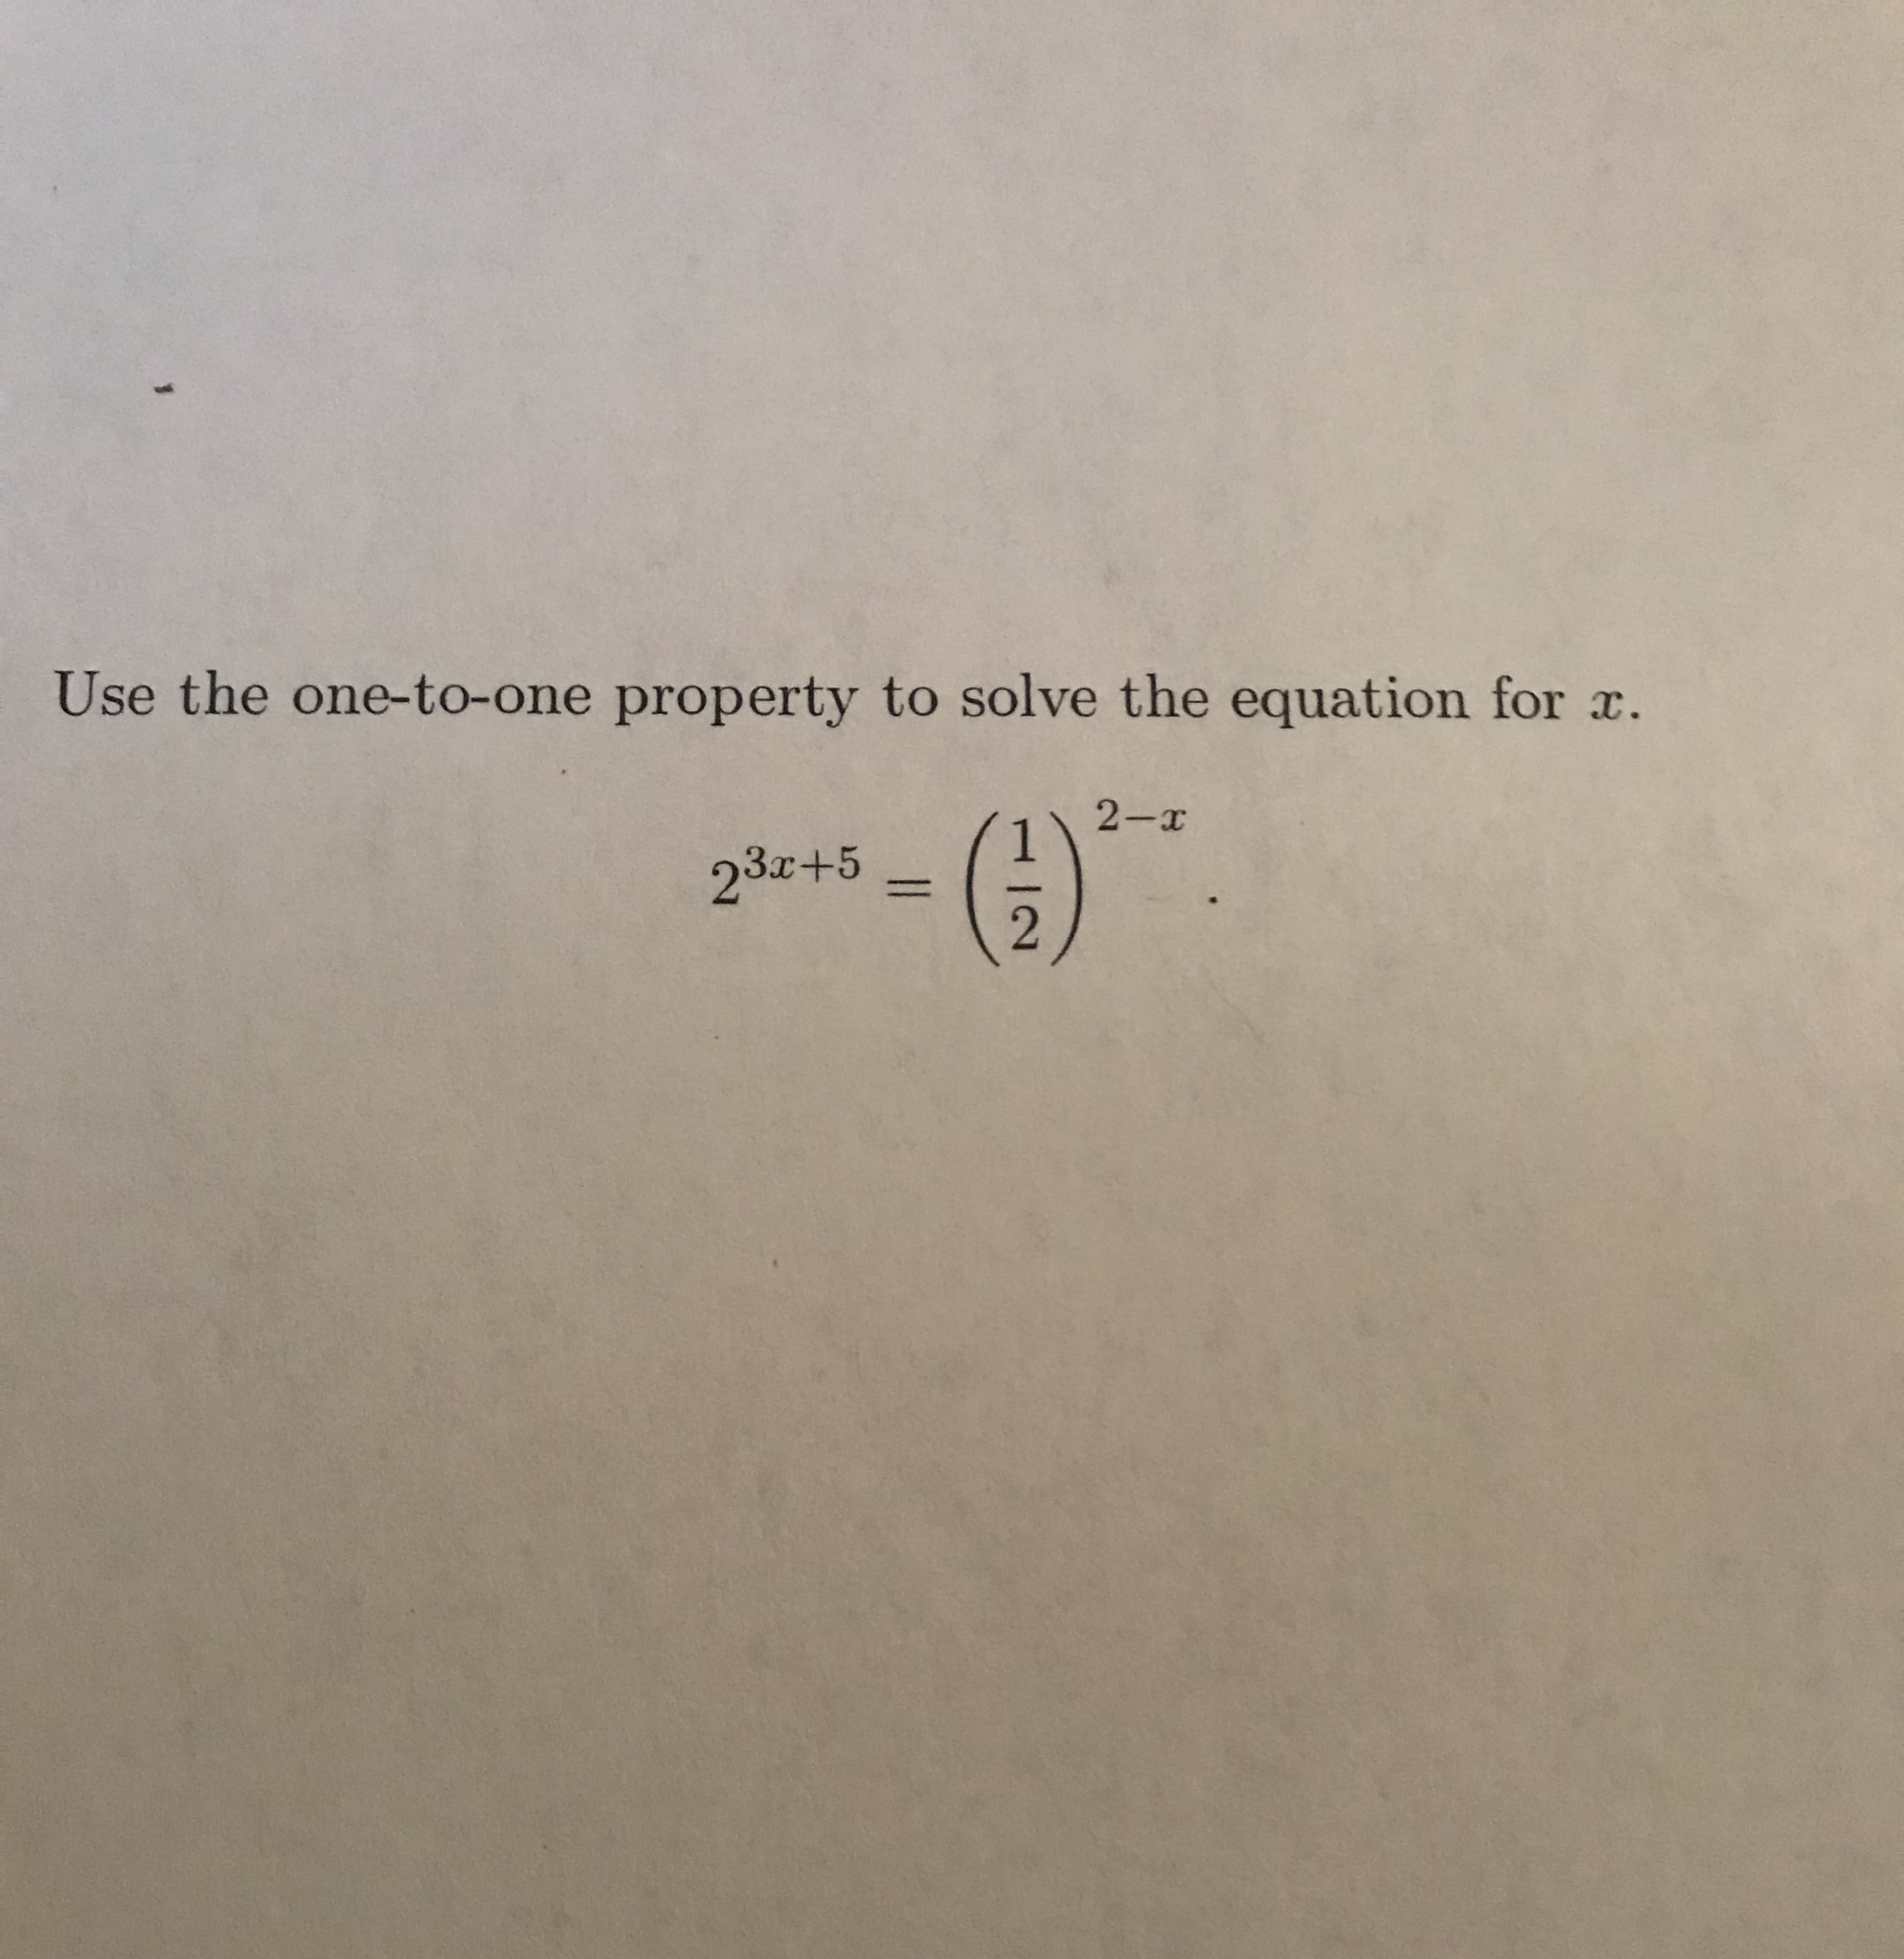 Use the one-to-one property to solve the equation for ac.
2-x
23c+5
